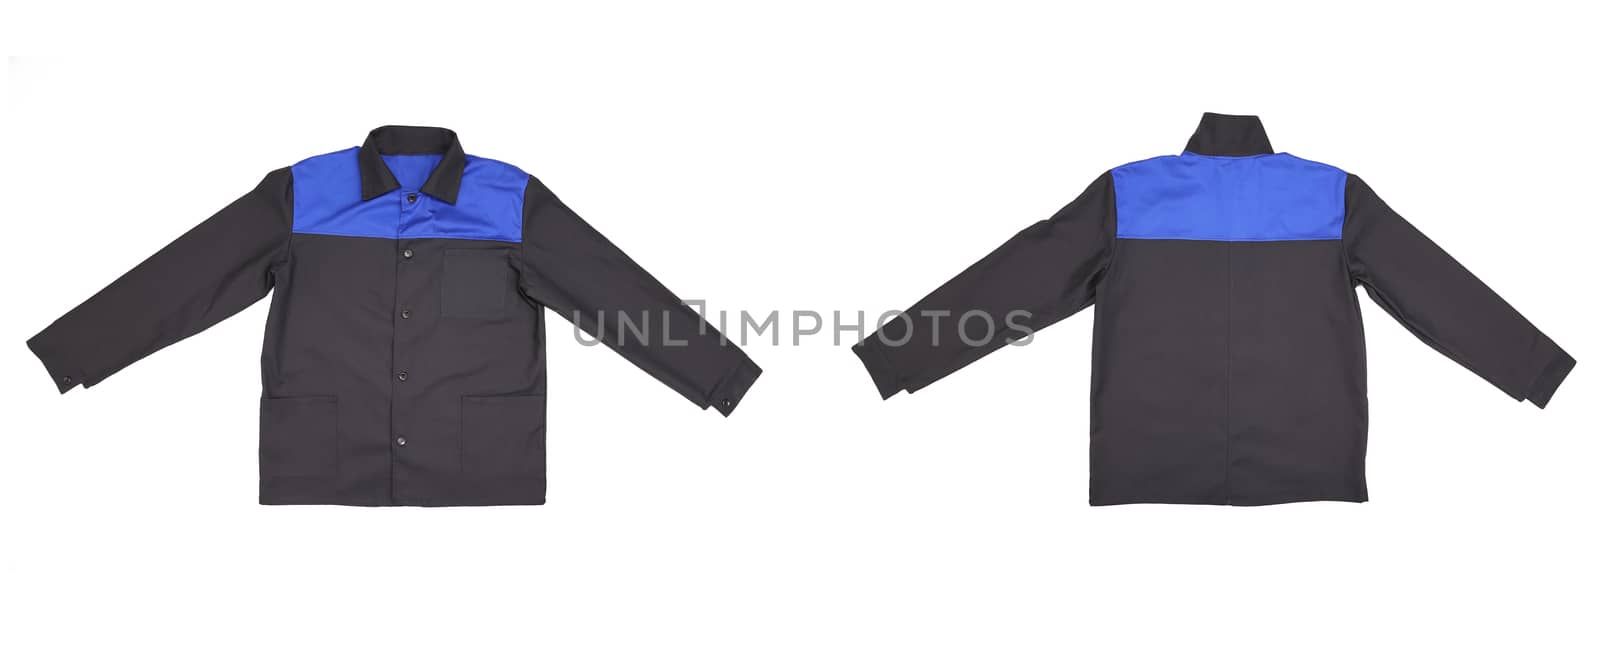 Blue-black jacket back and front view. by indigolotos